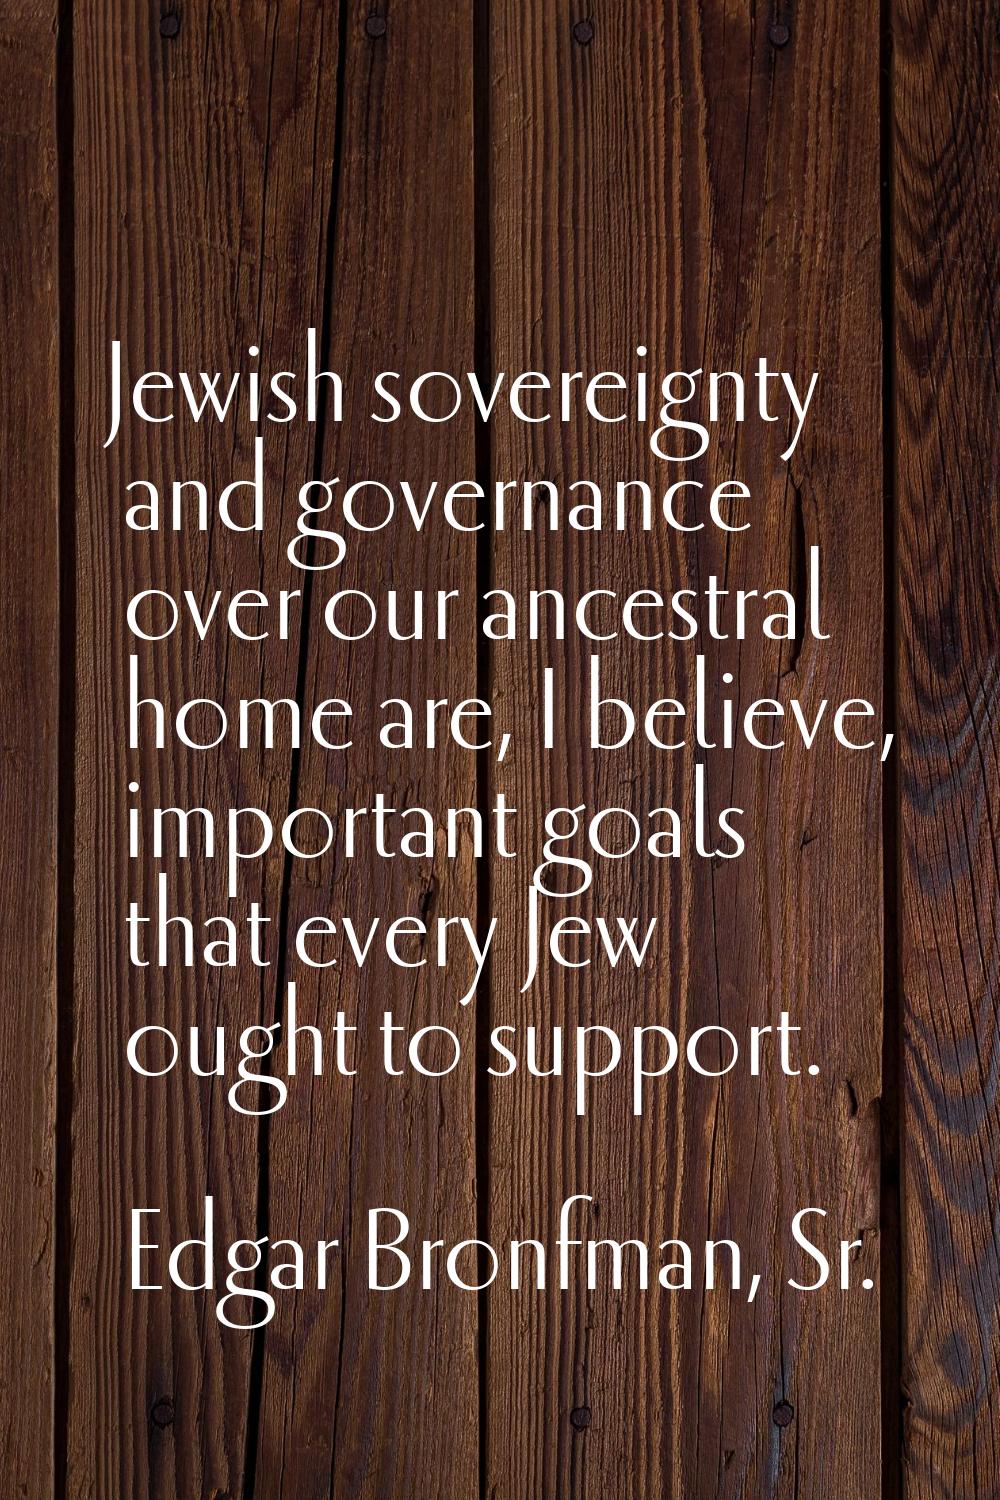 Jewish sovereignty and governance over our ancestral home are, I believe, important goals that ever